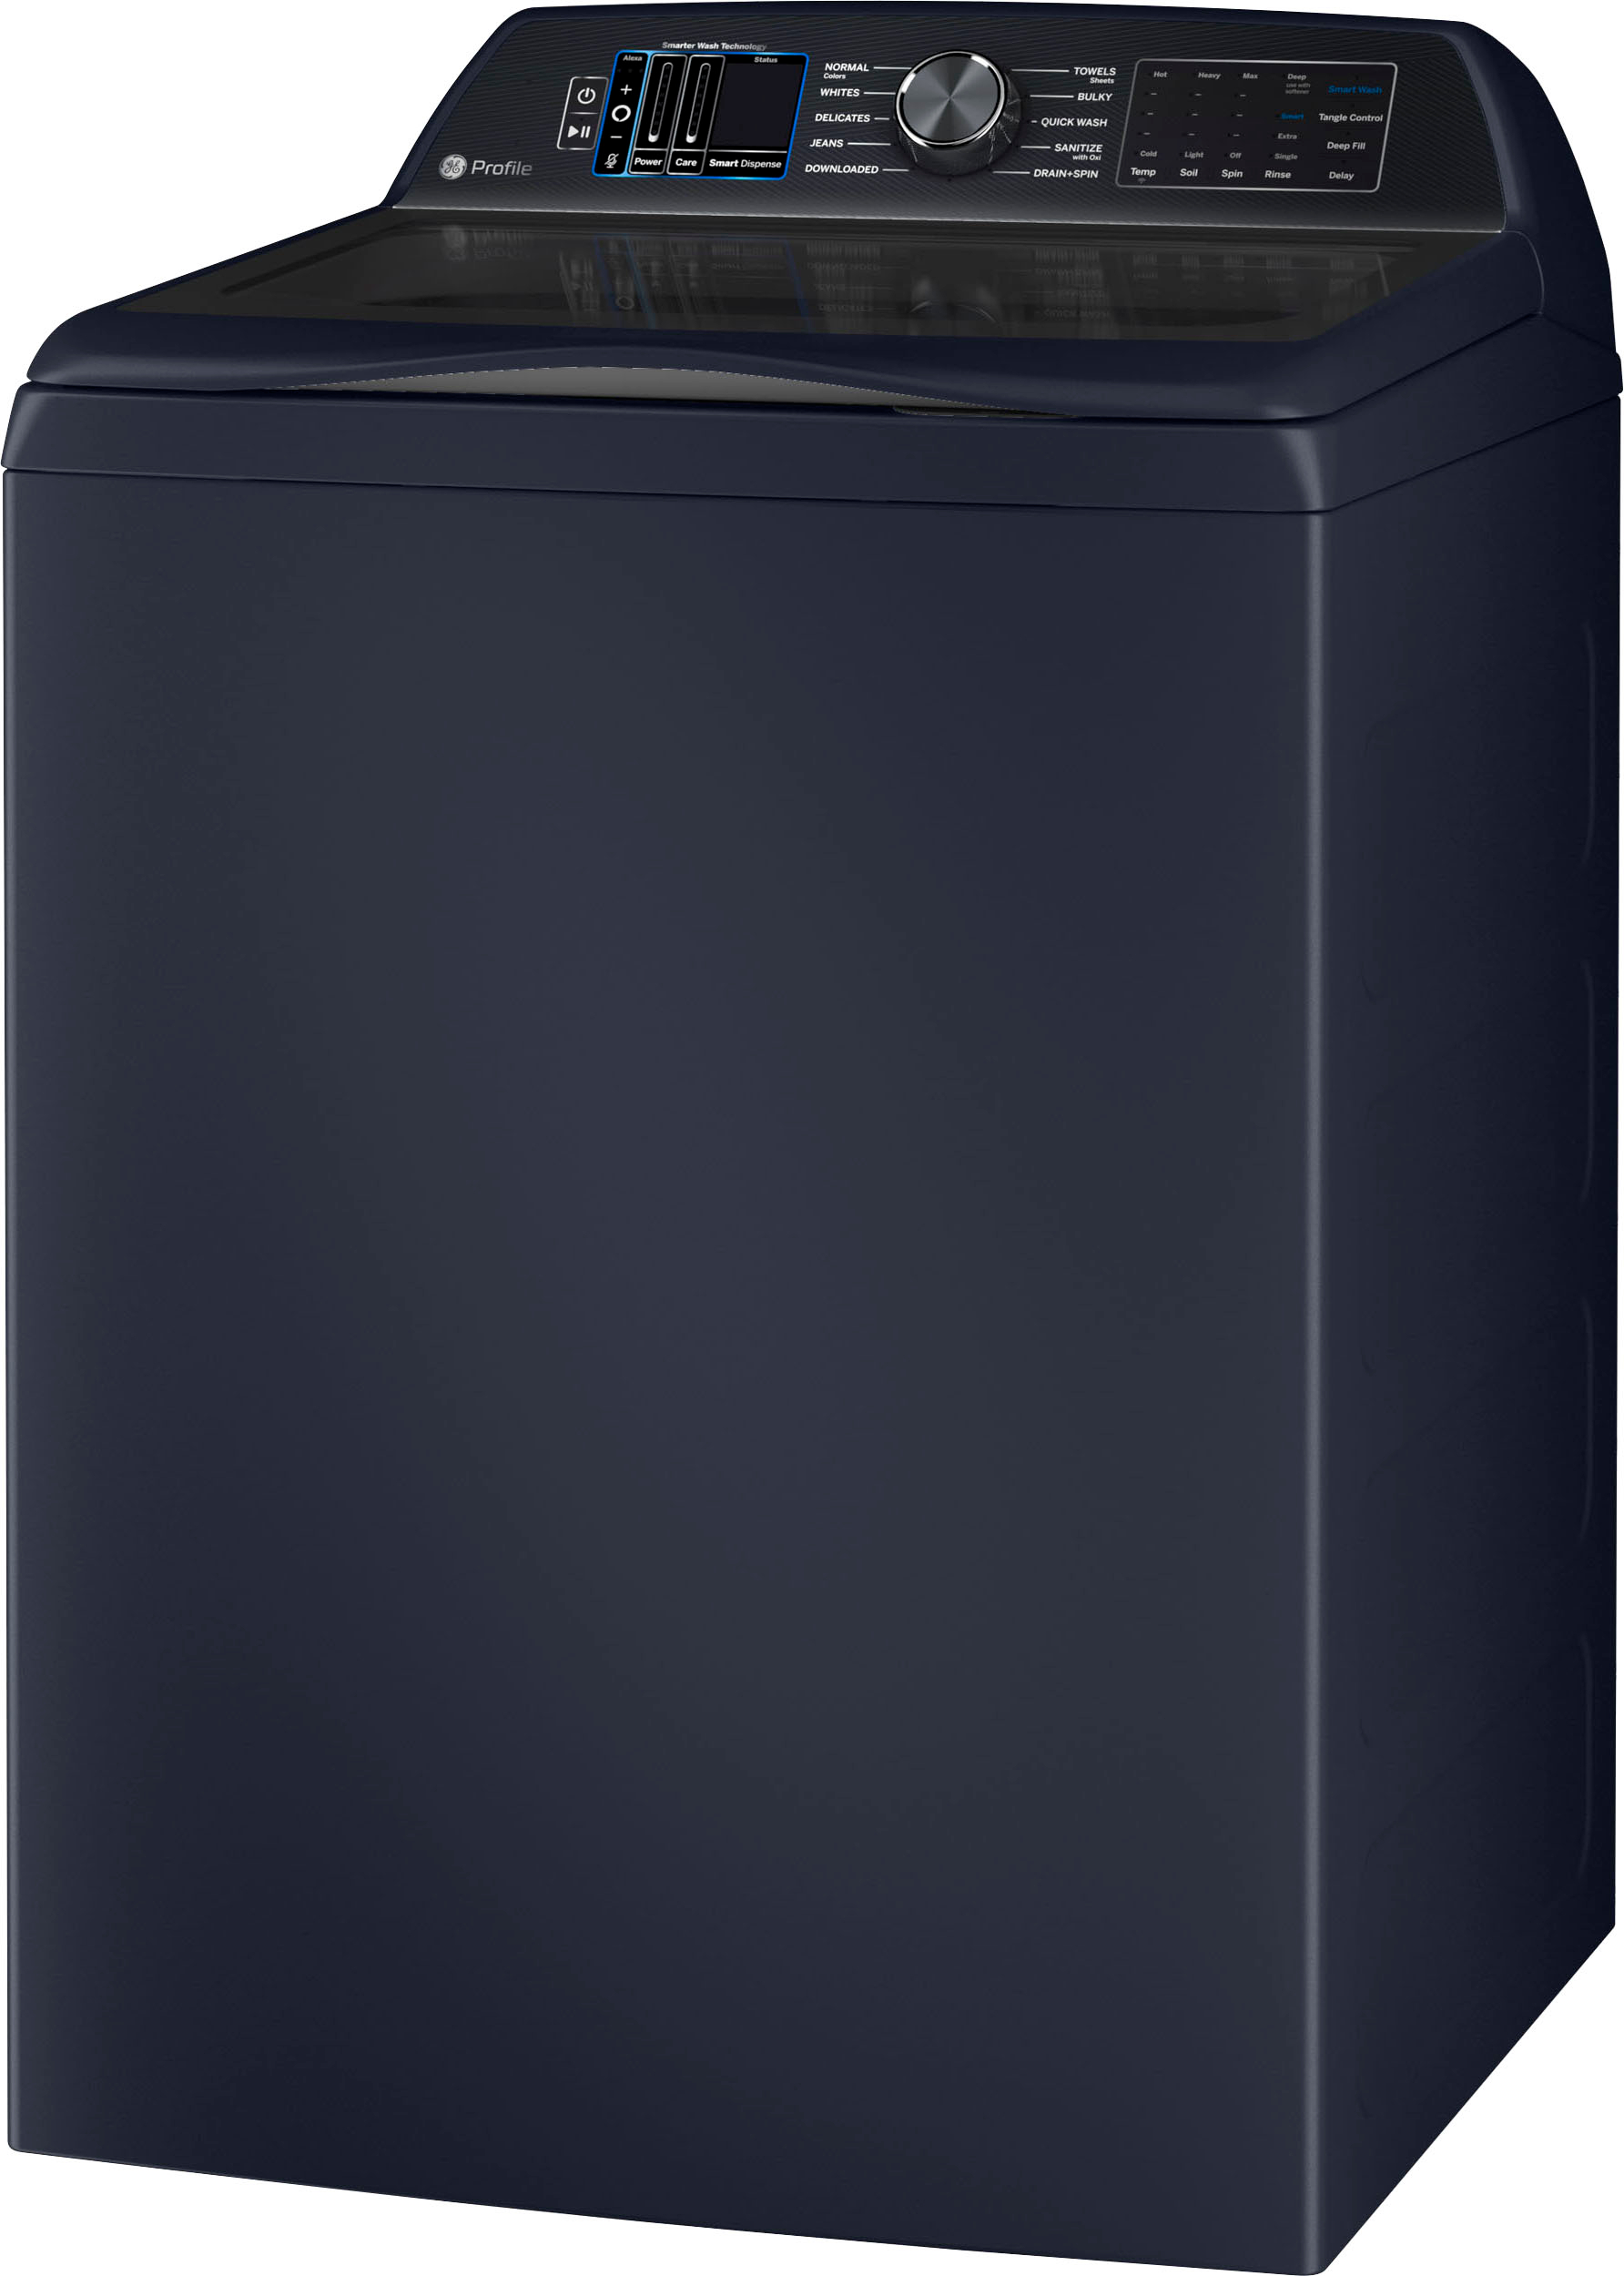 Left View: Samsung - 4.9 cu. ft. Large Capacity Top Load Washer with ActiveWave Agitator and Deep Fill - Black